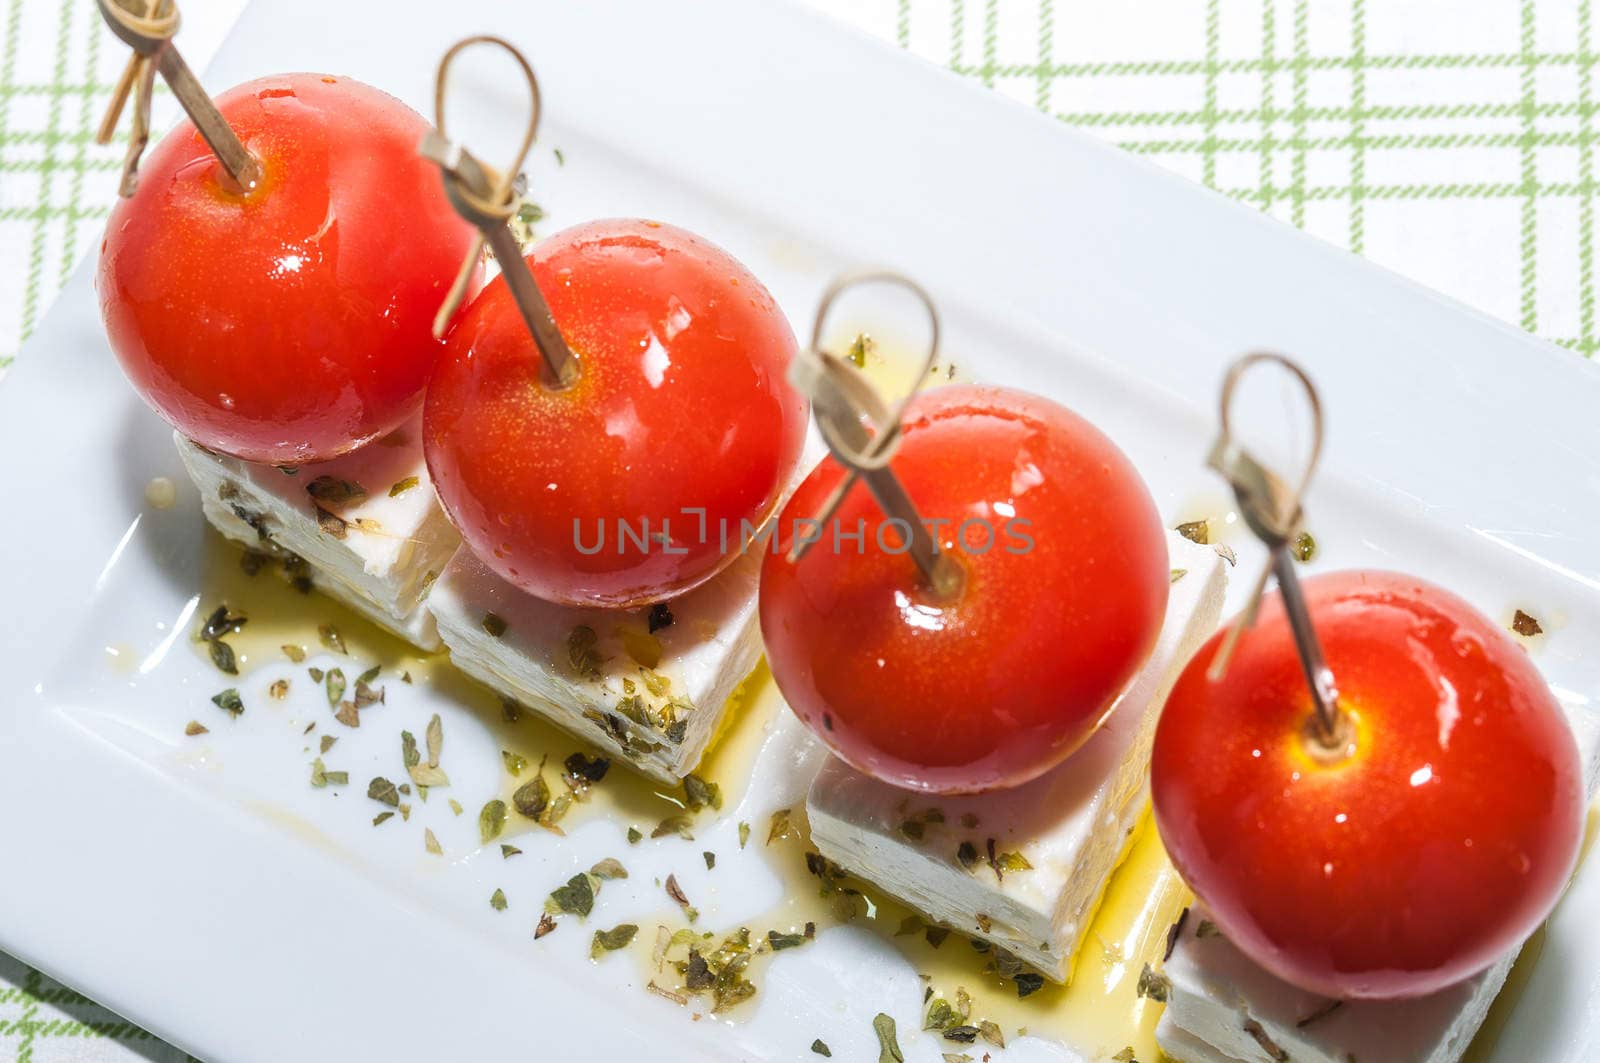 Cherry tomatoes with feta cheese, olive oil and oregano